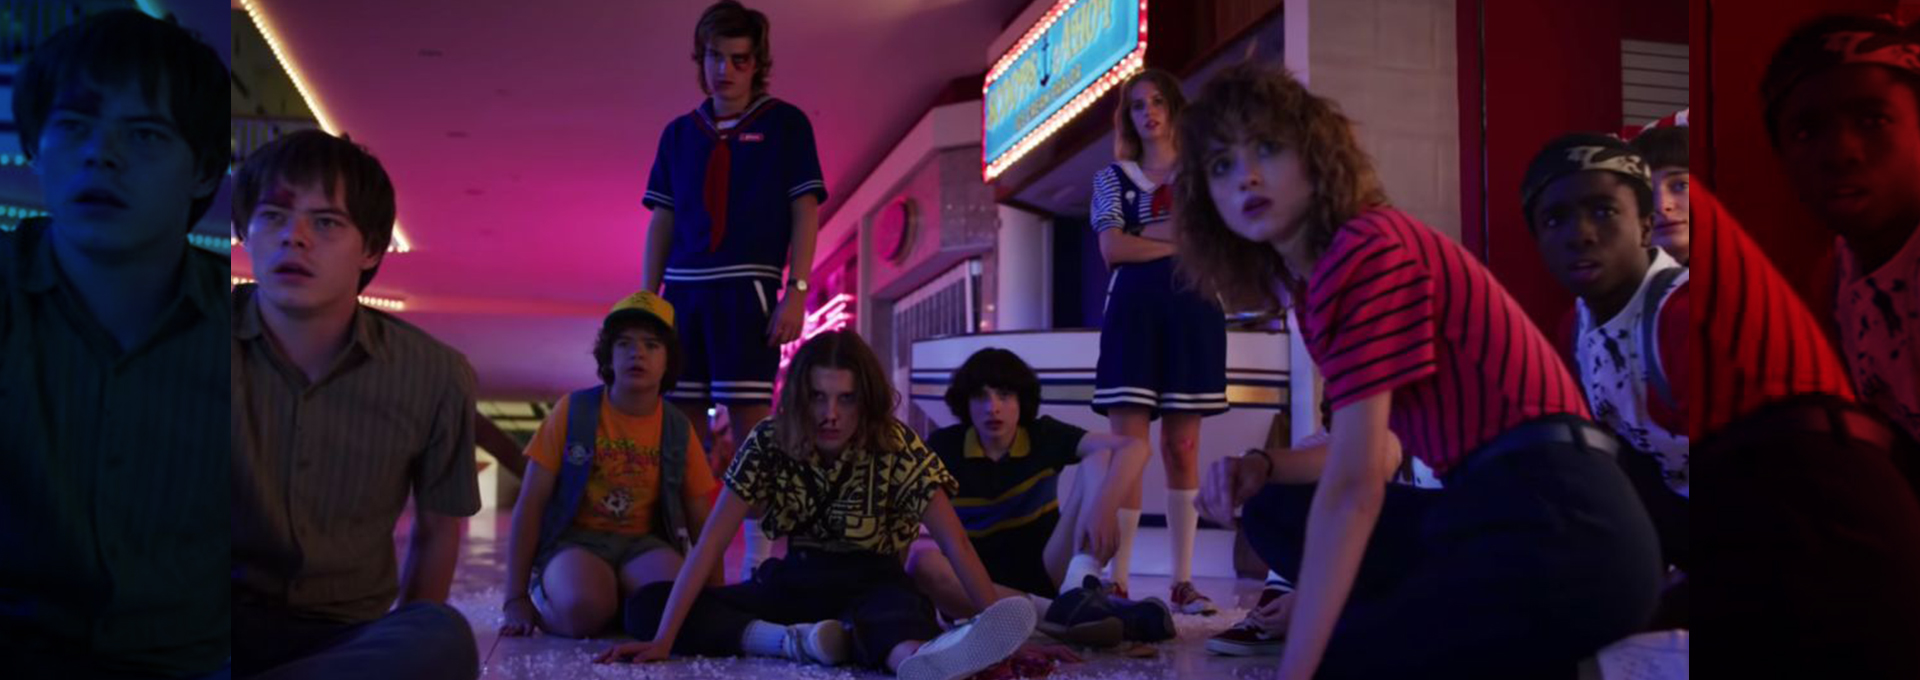 The Final Trailer for ‘Stranger Things’ Season 3 Features... A Lot of ...